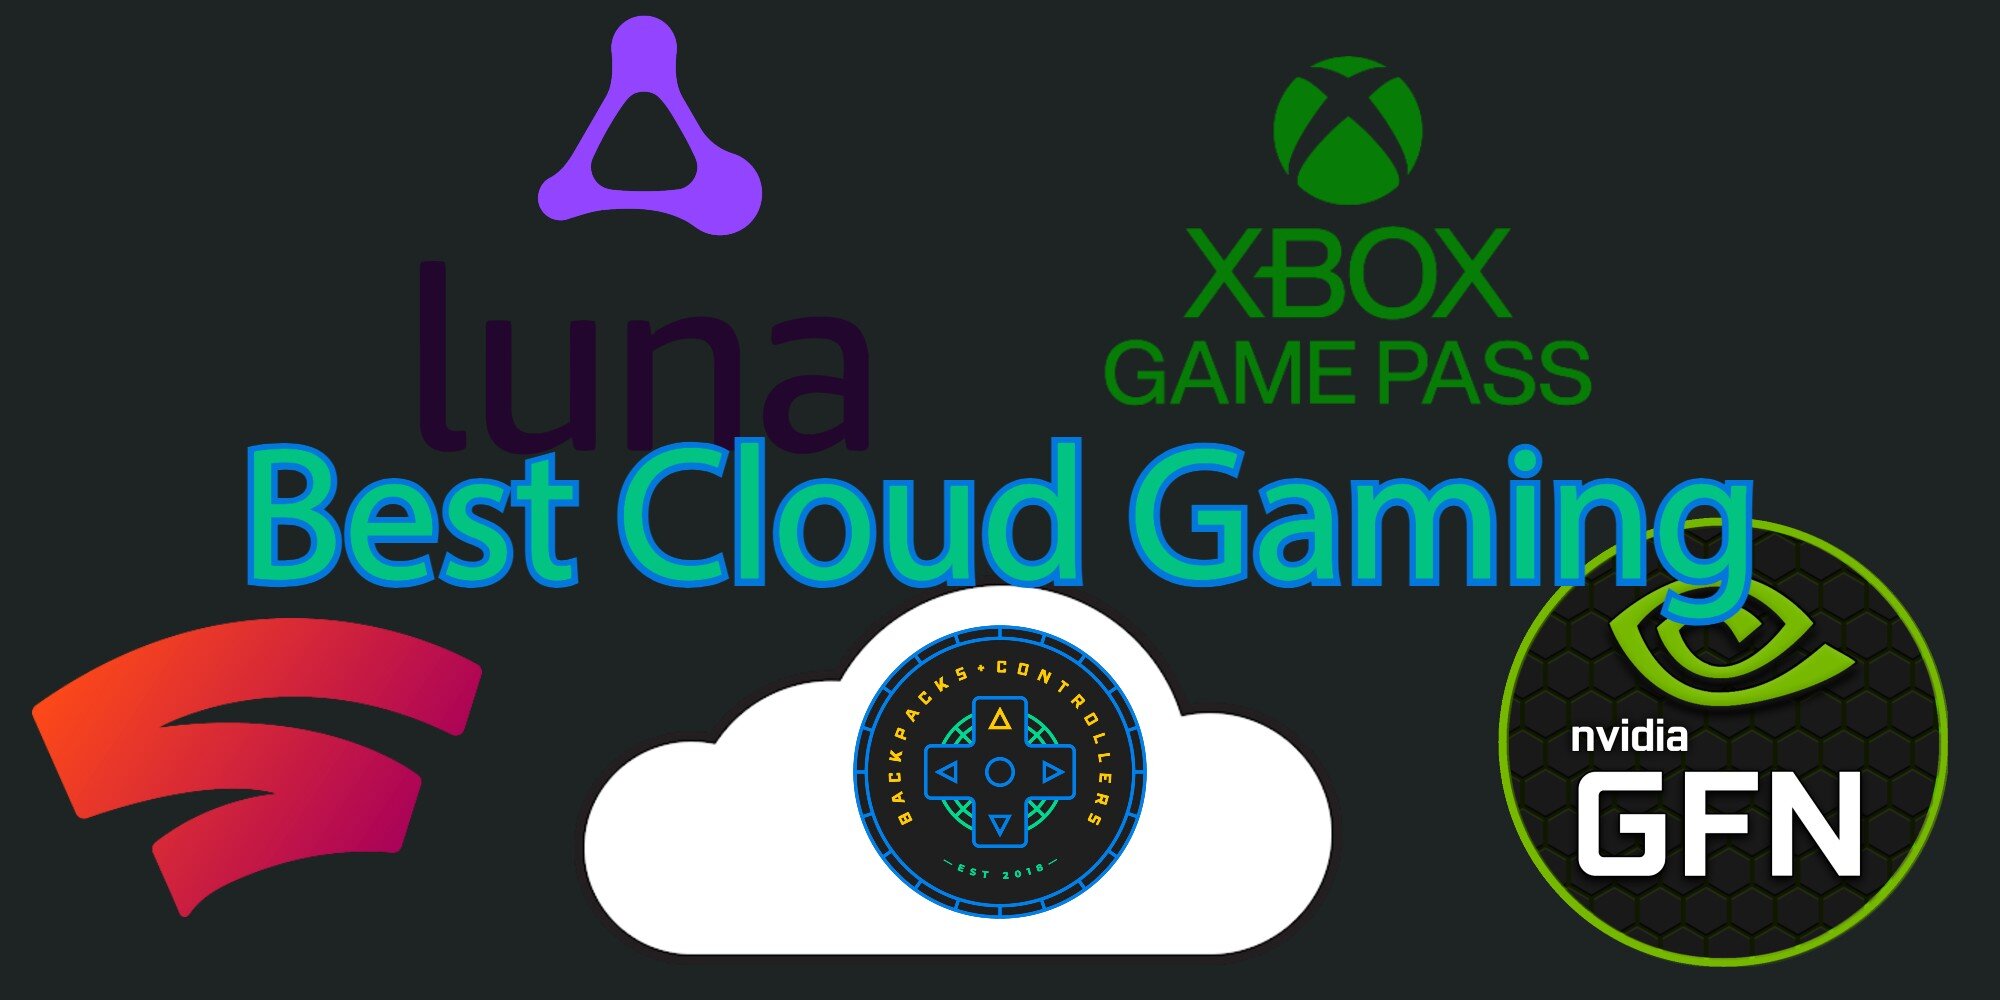 The 4 Best Cloud Gaming Services (But None of Them Are Great)